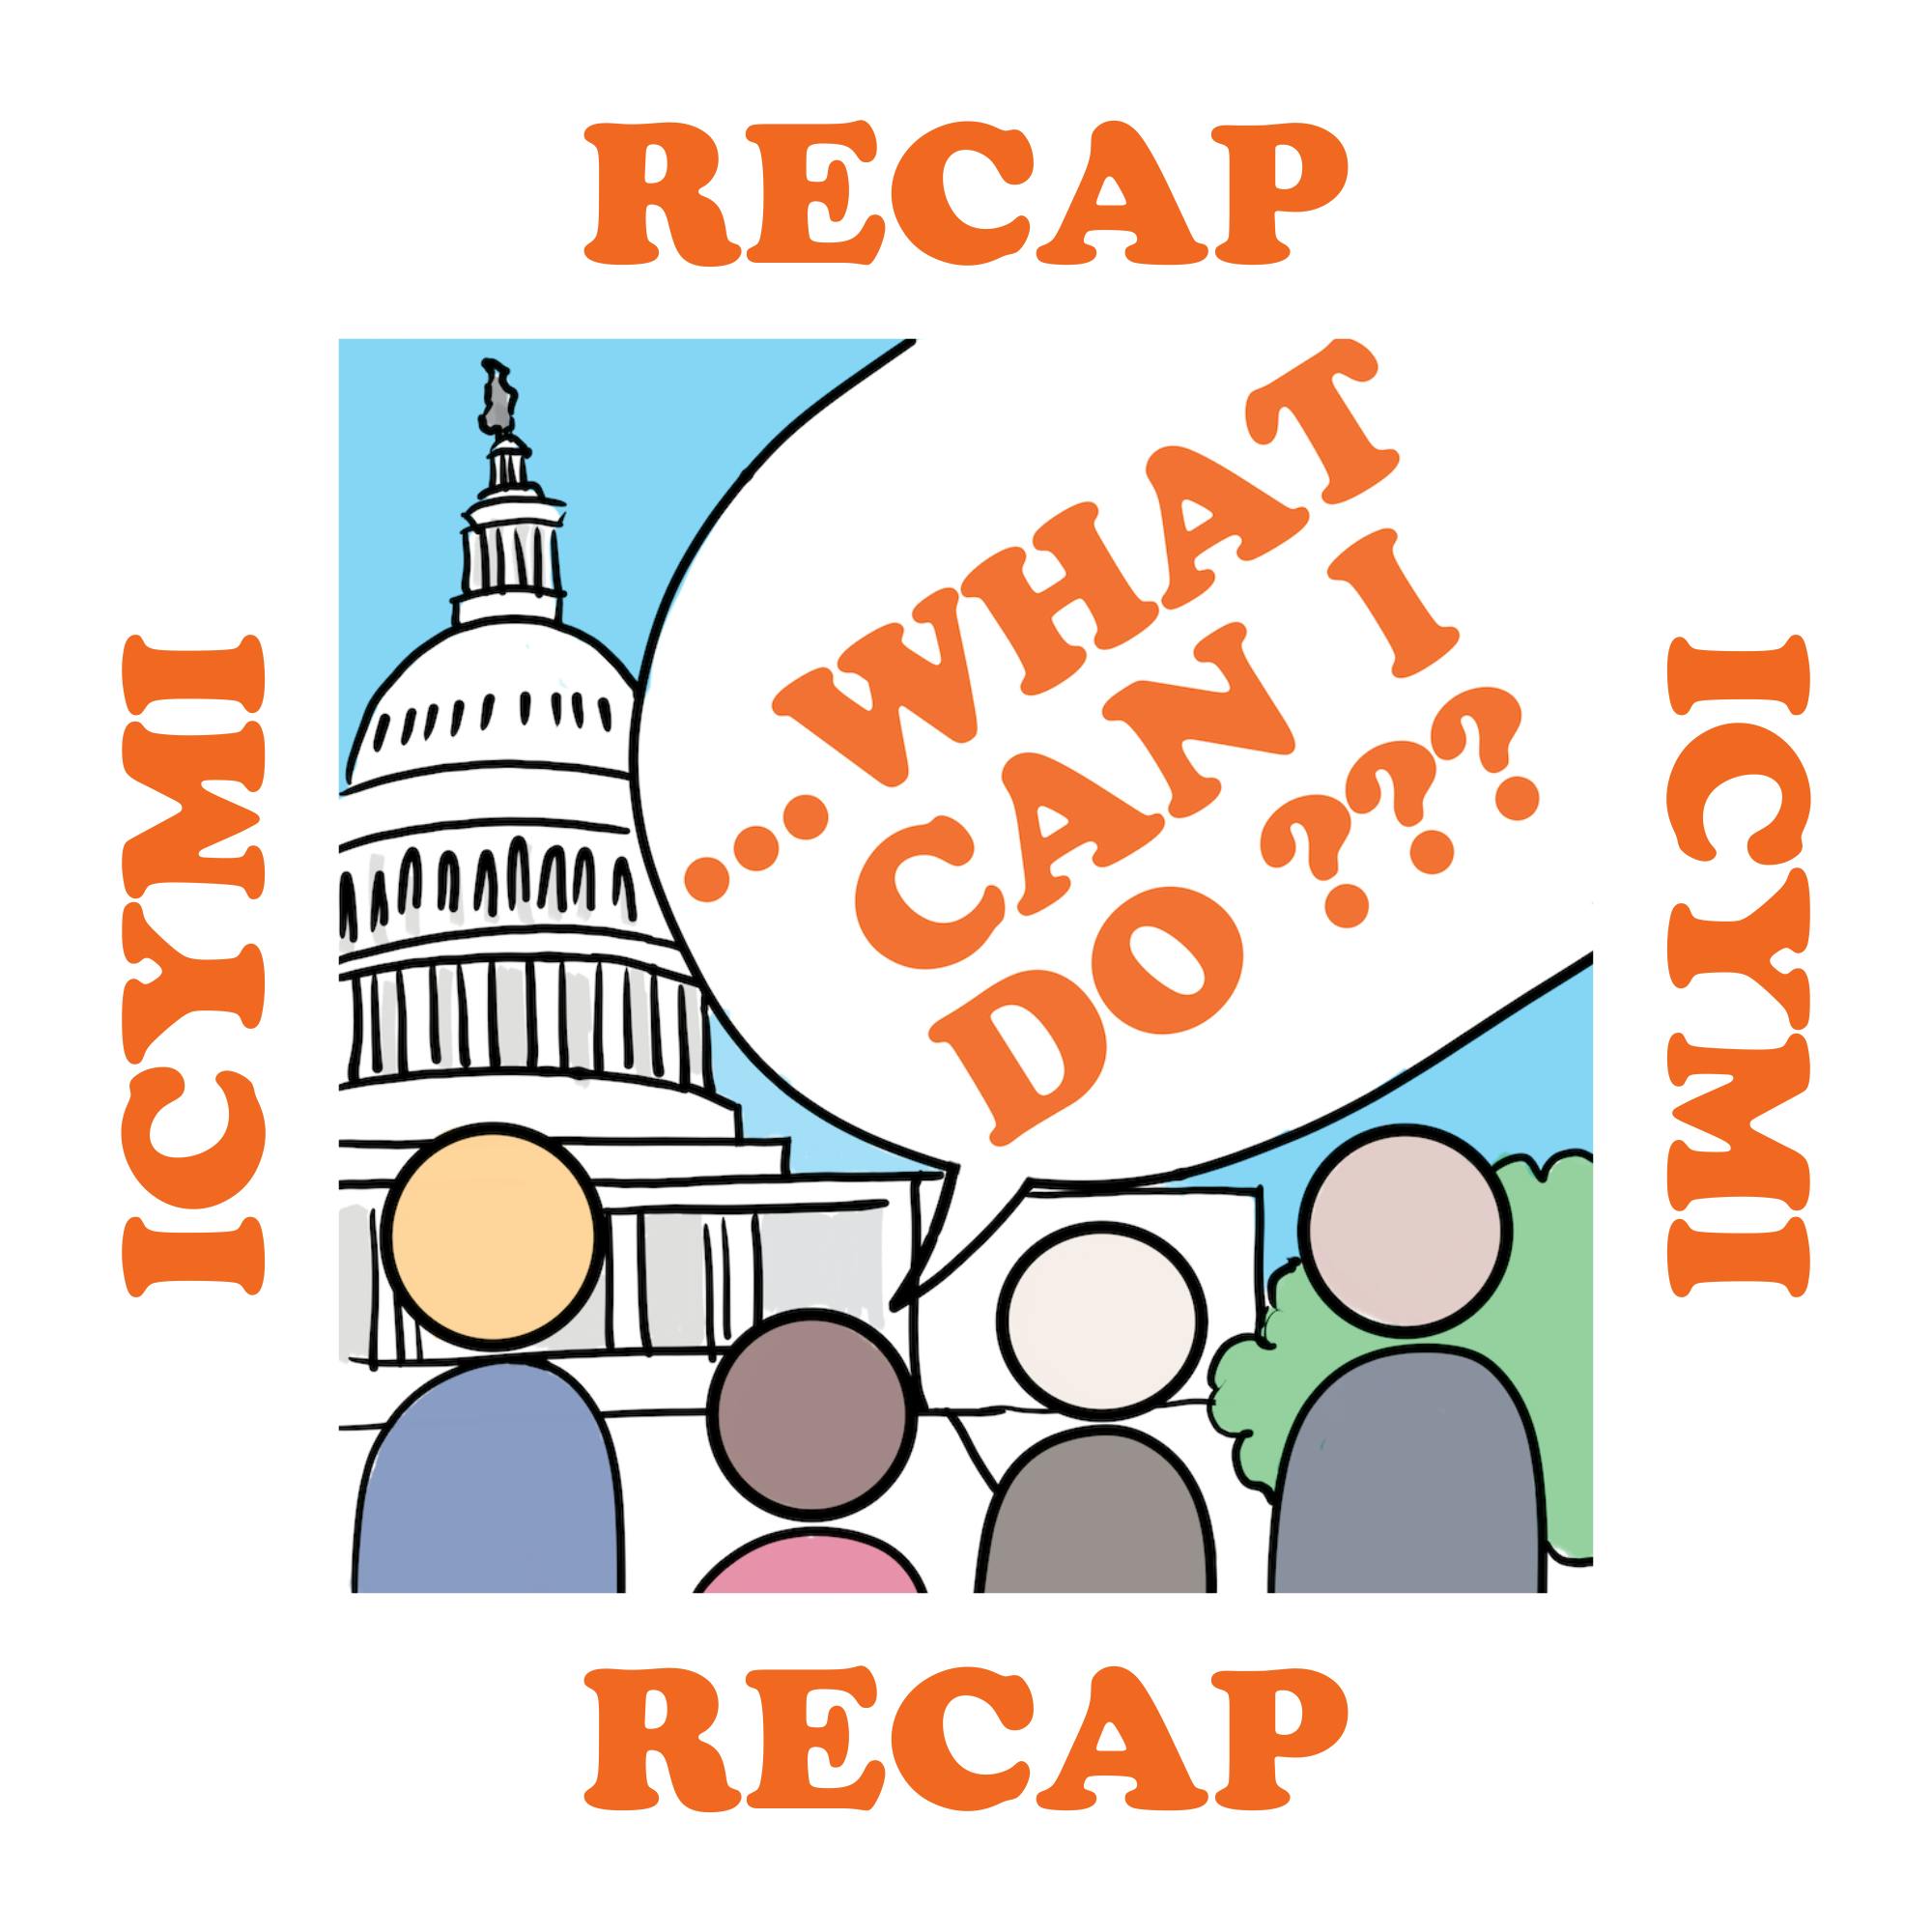 ICYMI - Recap 2 (aka, What Can I Do After the Midterms) Image